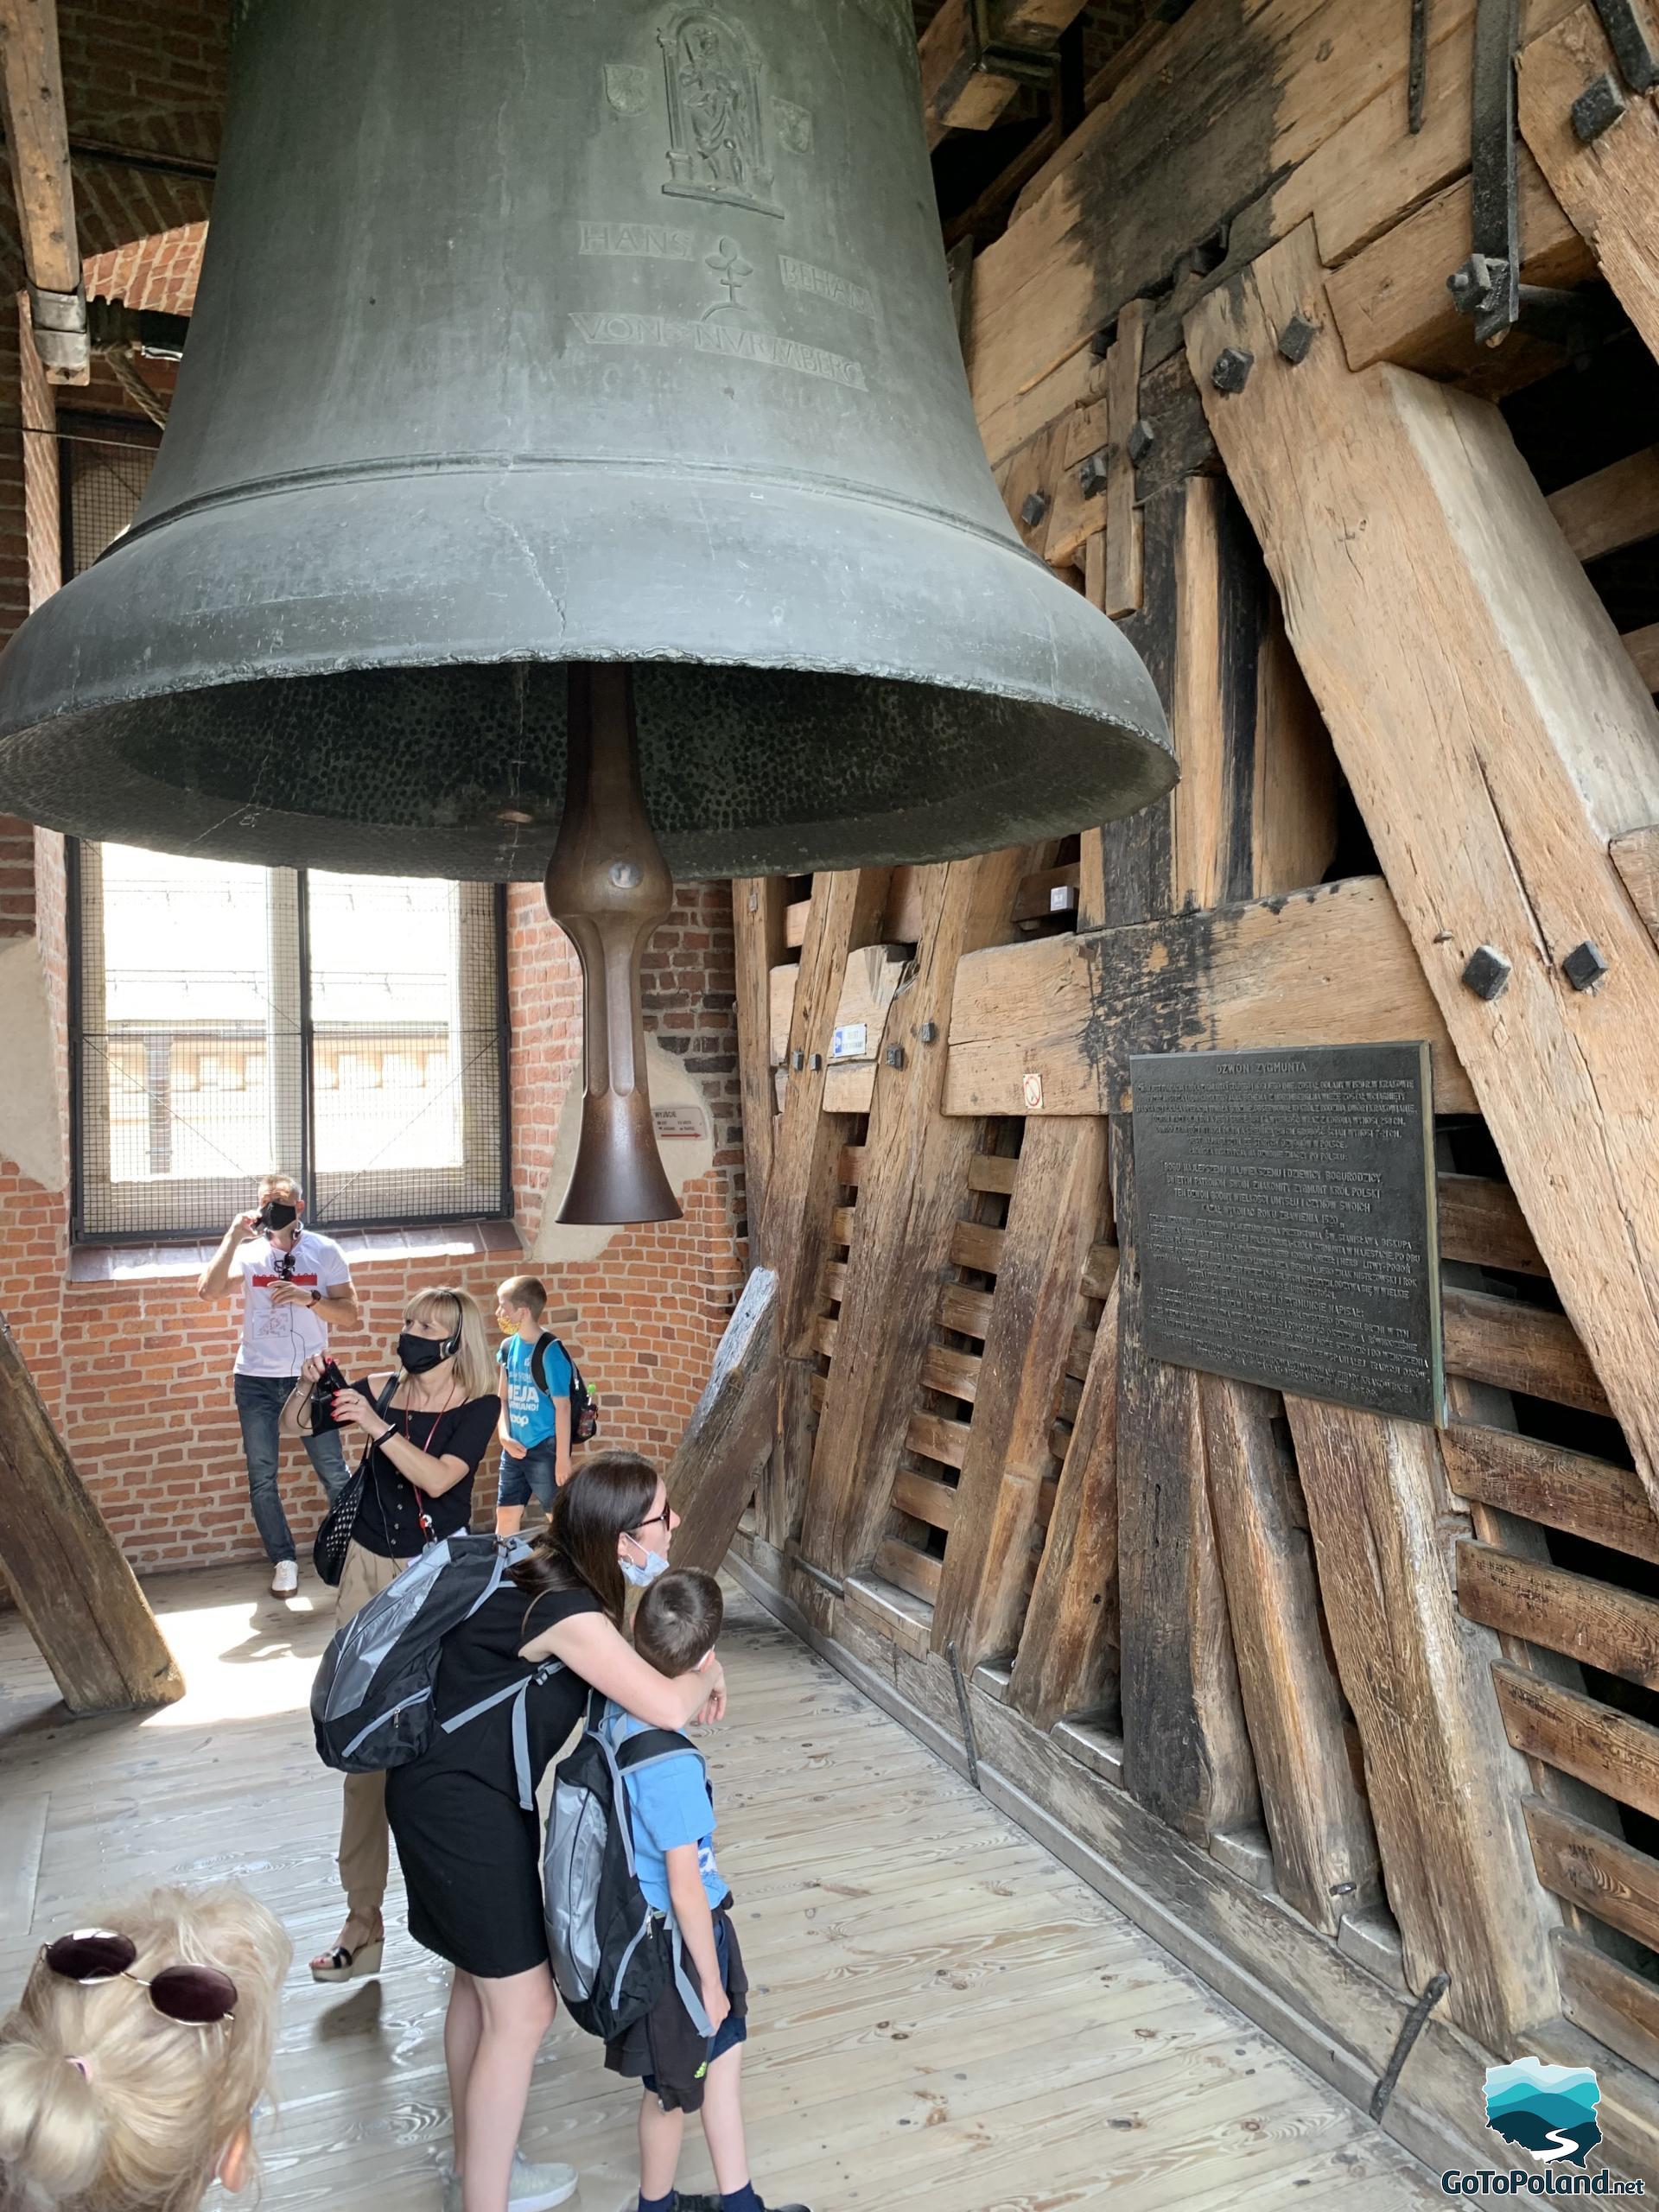 a woman an a boy are standing under a huge bell, she is reading an information about bell